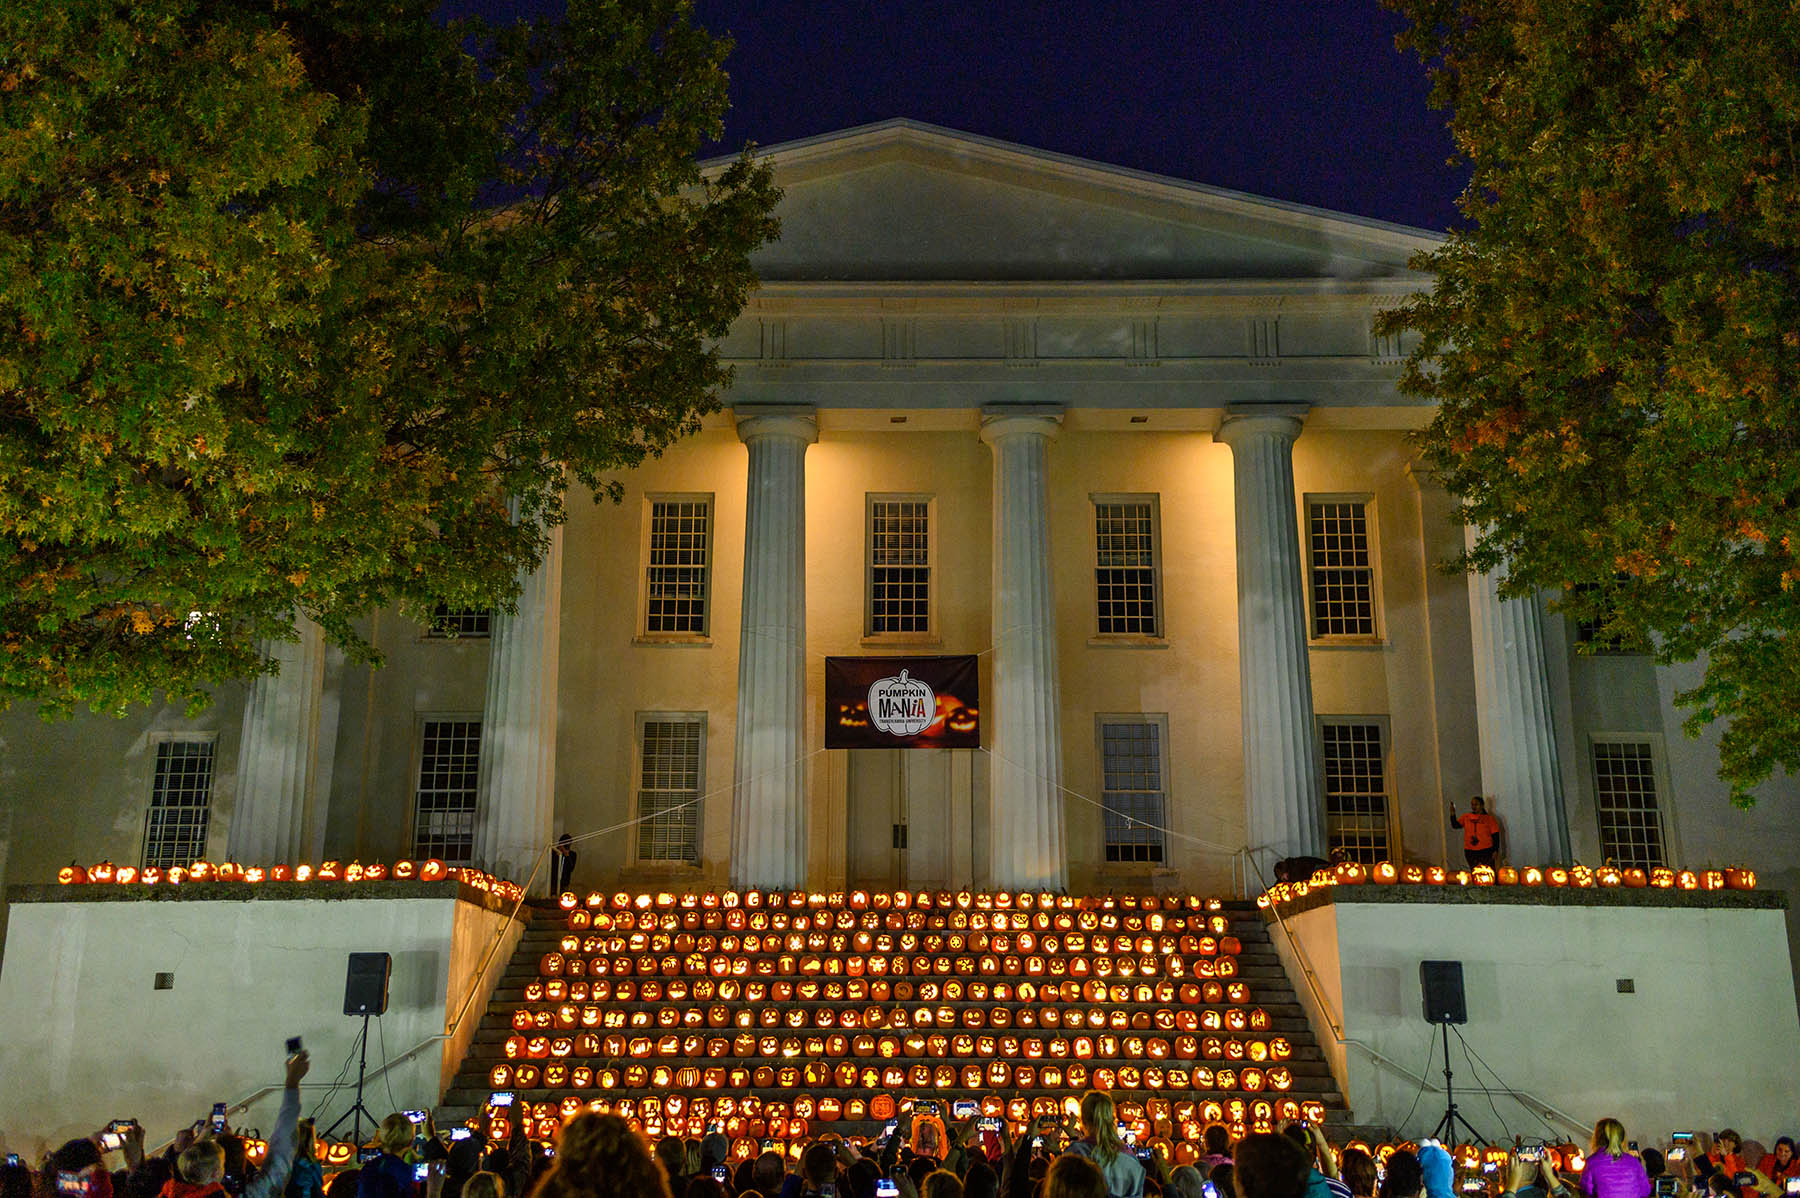 Transy brings “Power to the Pumpkins” at annual celebration